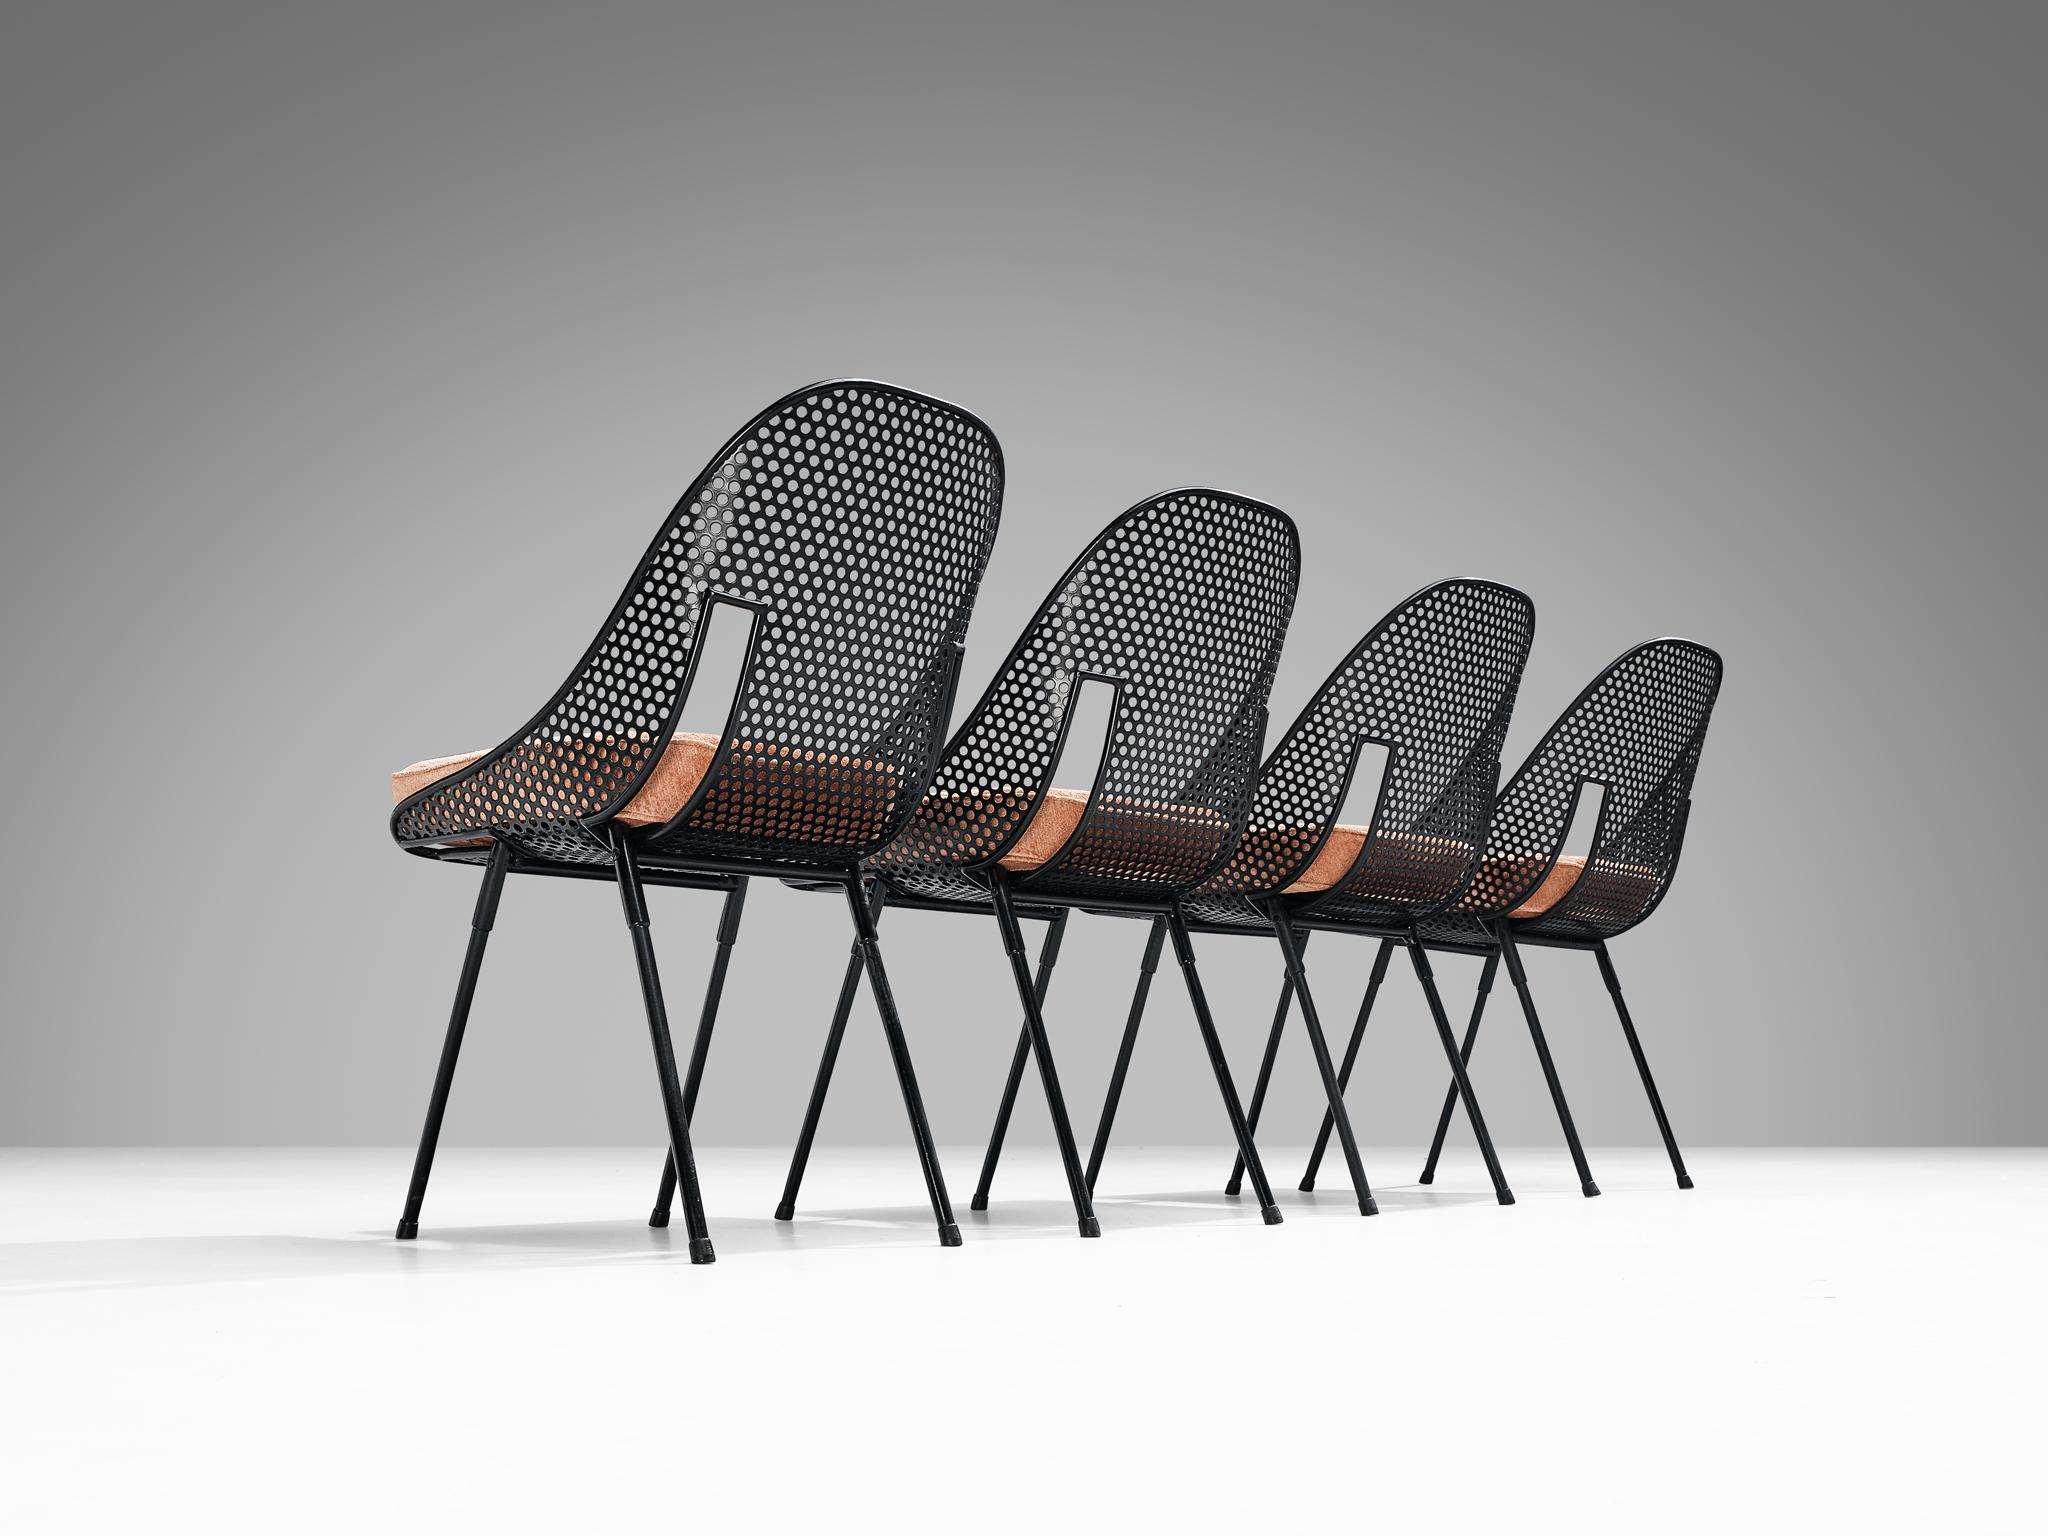 Rare Giuseppe De Vivo Set of Six Chairs in Black Perforated Metal  For Sale 2